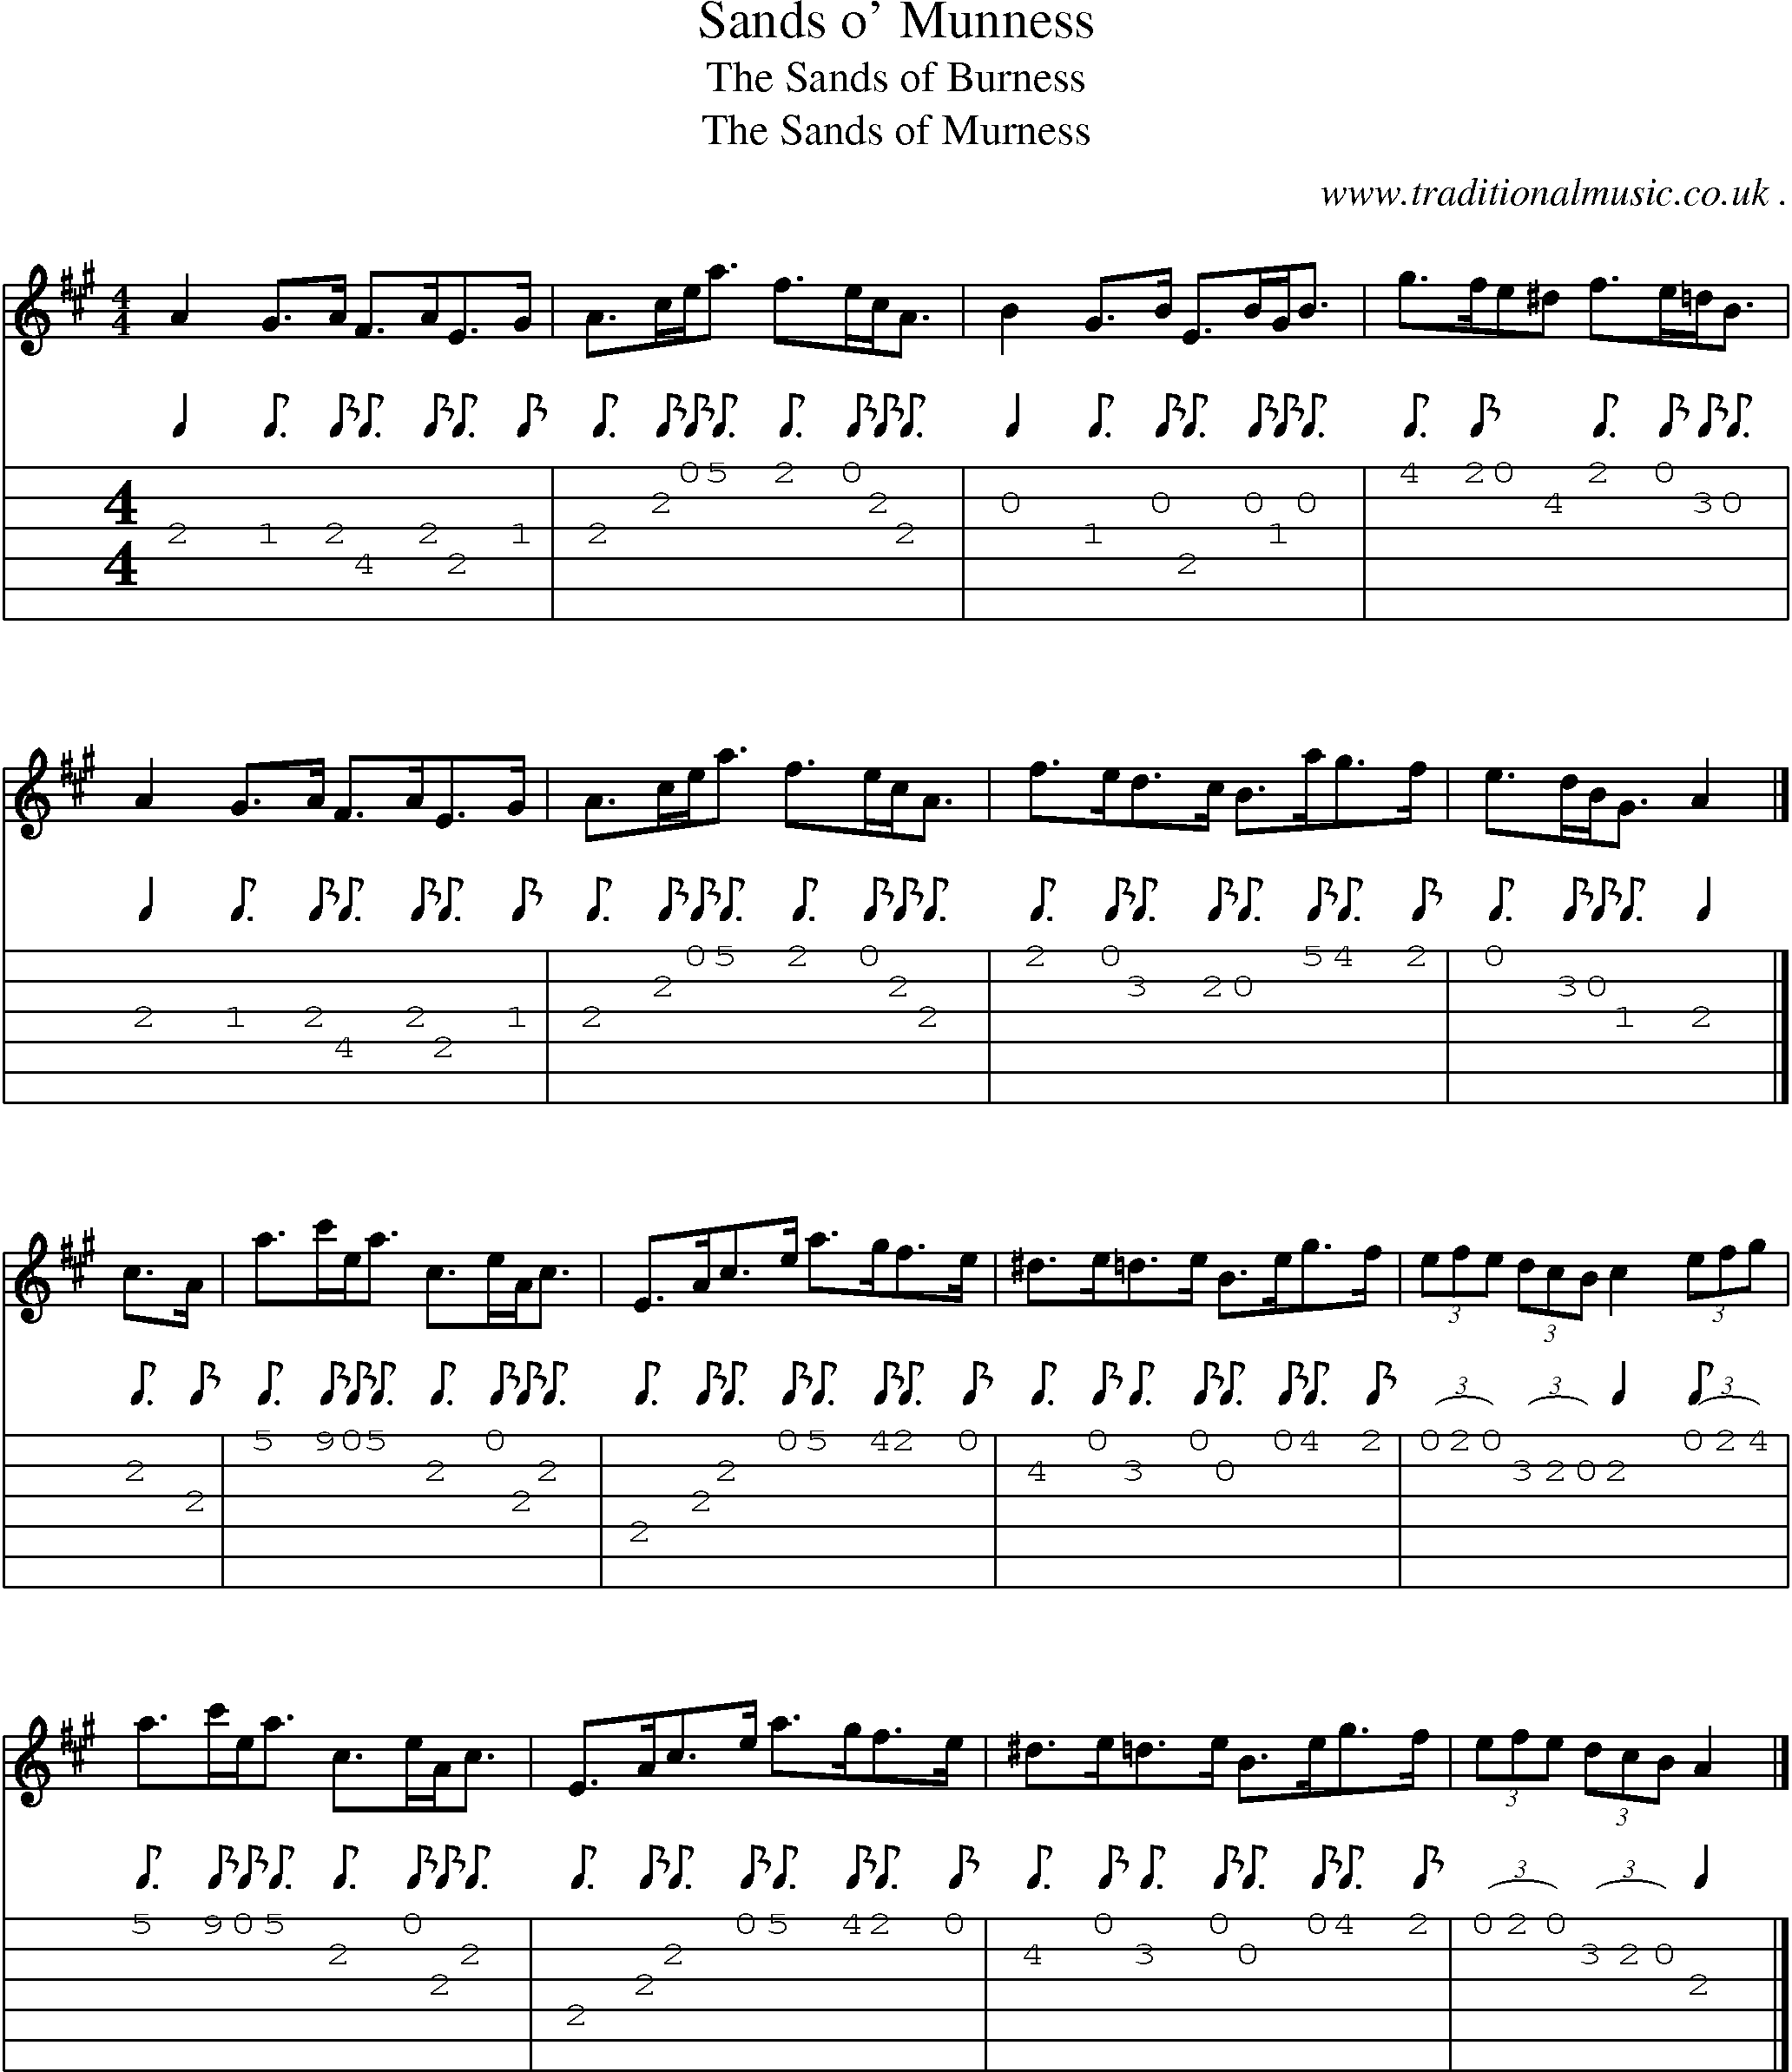 Sheet-music  score, Chords and Guitar Tabs for Sands O Munness